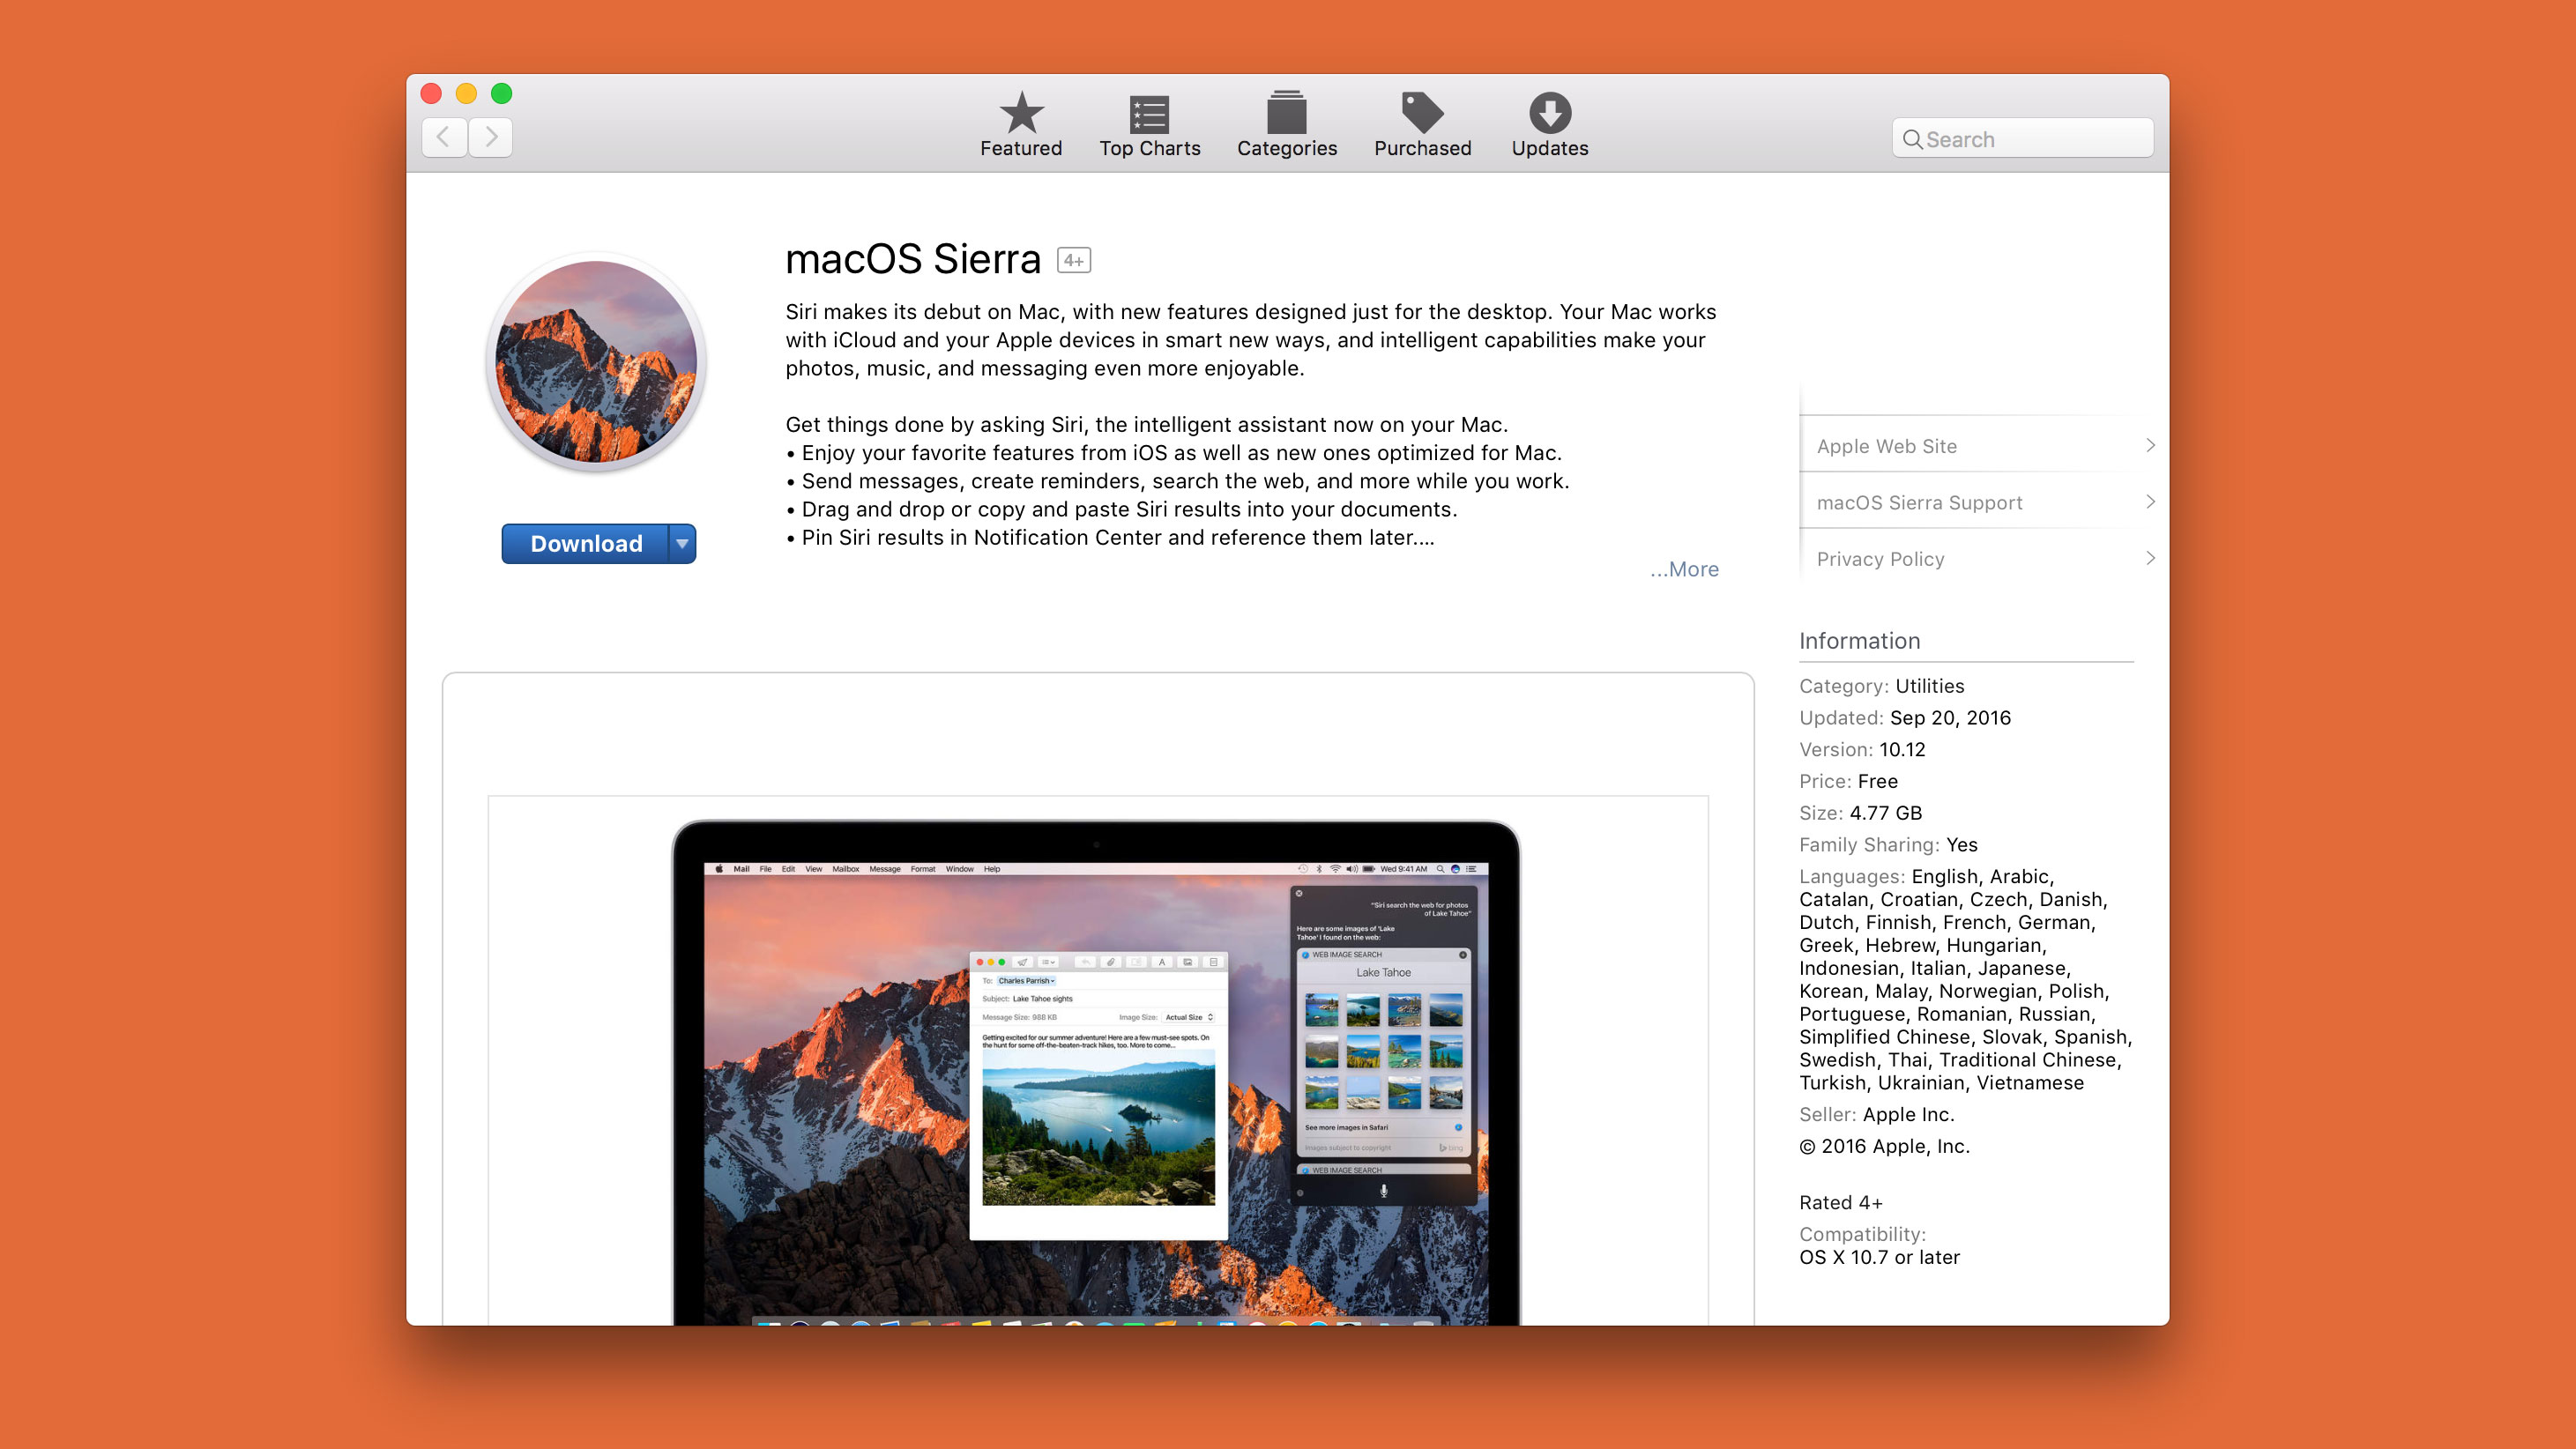 You can download the new Mac operating system for free right now